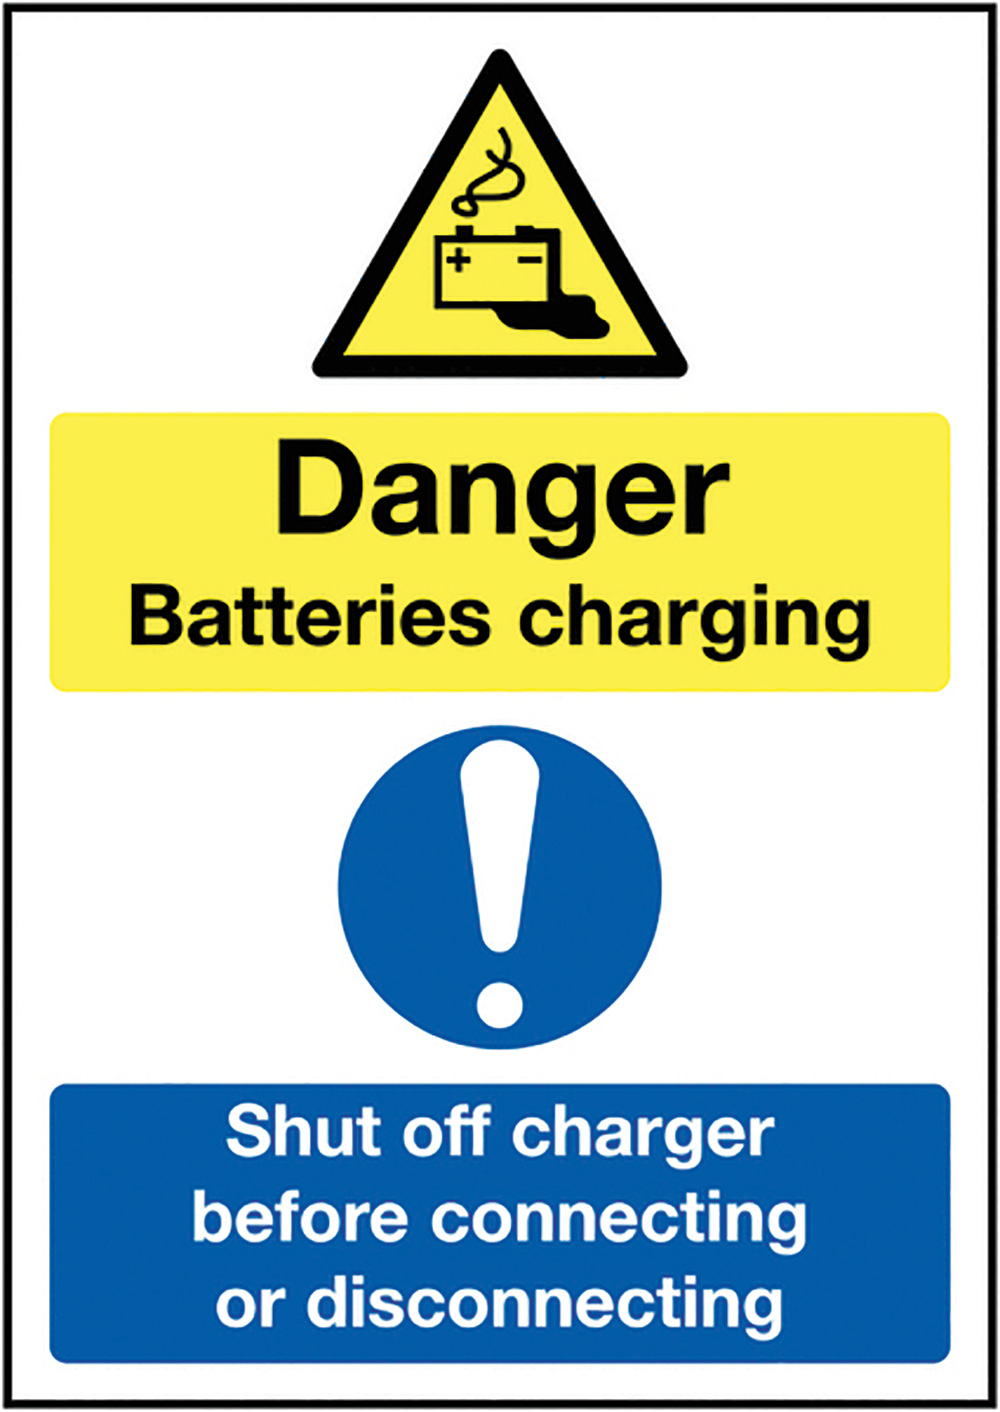 Danger Batteries Charging Shut Off Charger Before Connecting Etc 297x210mm Rigid Sign